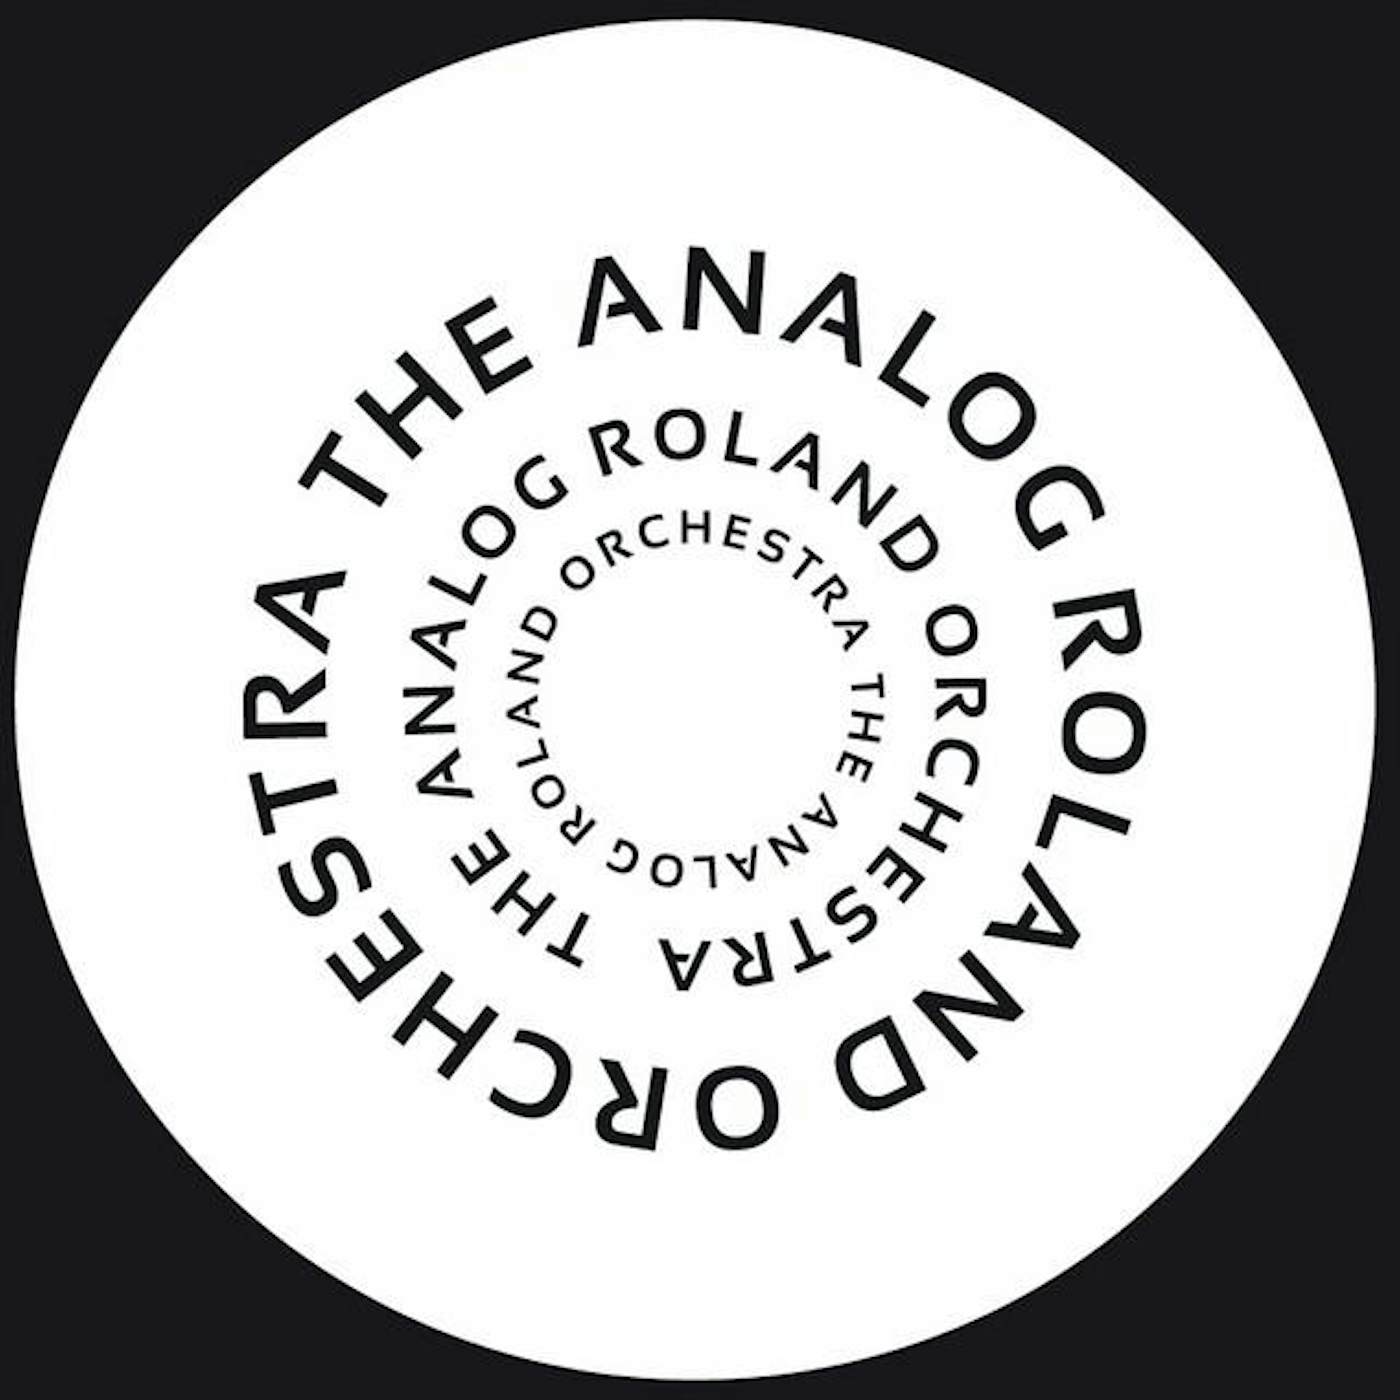 The Analog Roland Orchestra